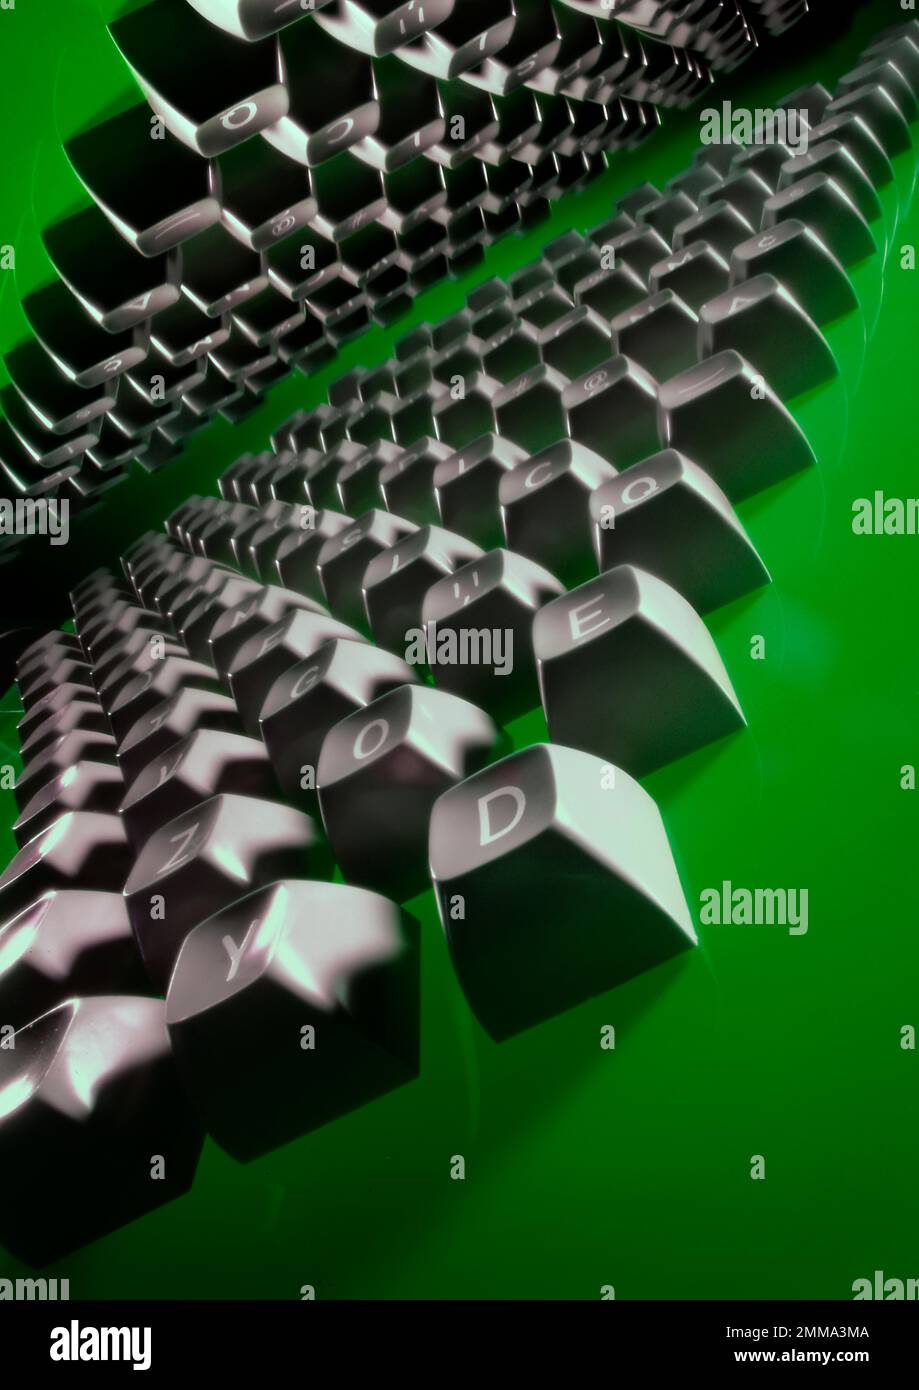 Computer keys in graphic, dramatic image, with vanishing point to the horizon.  Green background in this studio photograph. Stock Photo